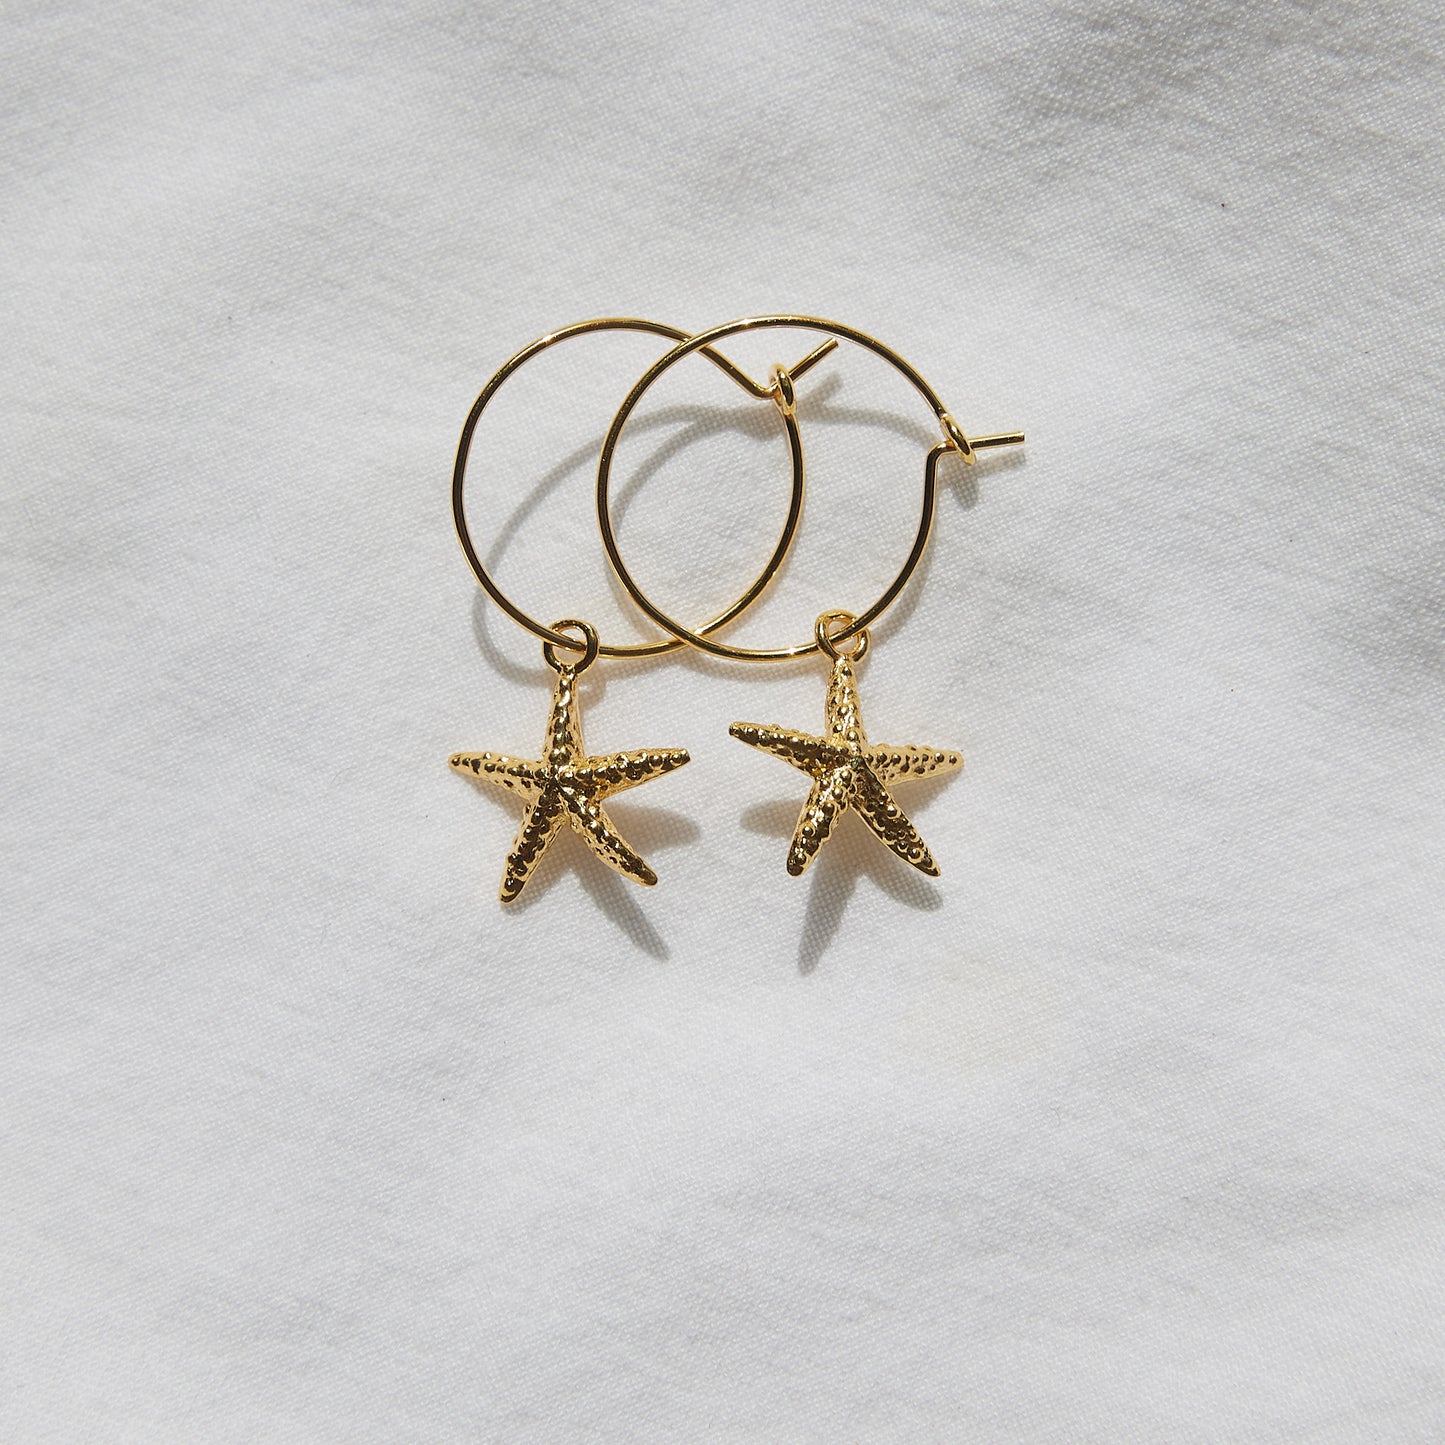 Starfish hoops 24k gold plated sterling silver